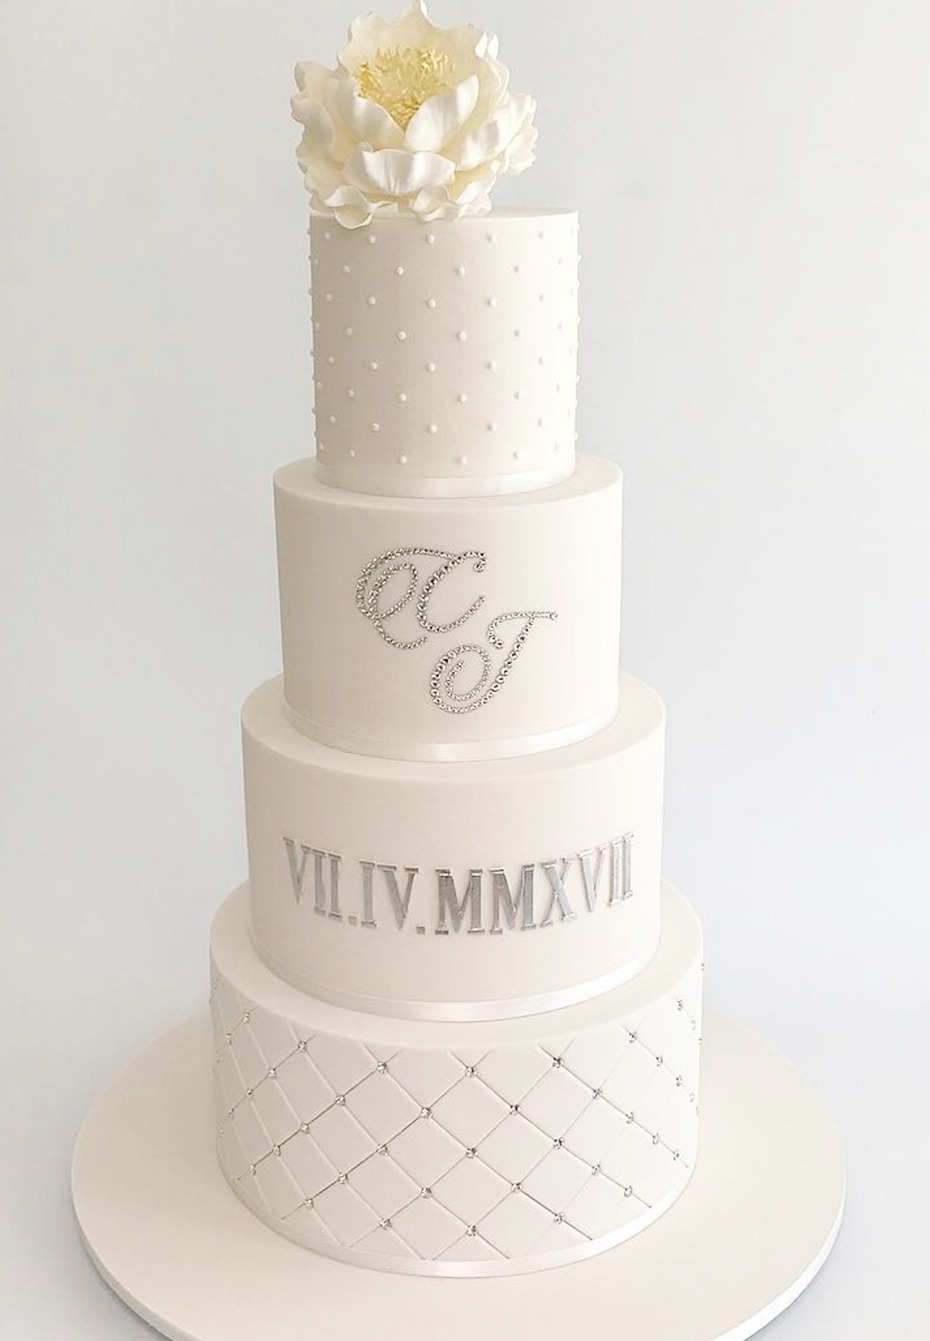 white and silver wedding cake with wedding date in roman numerals